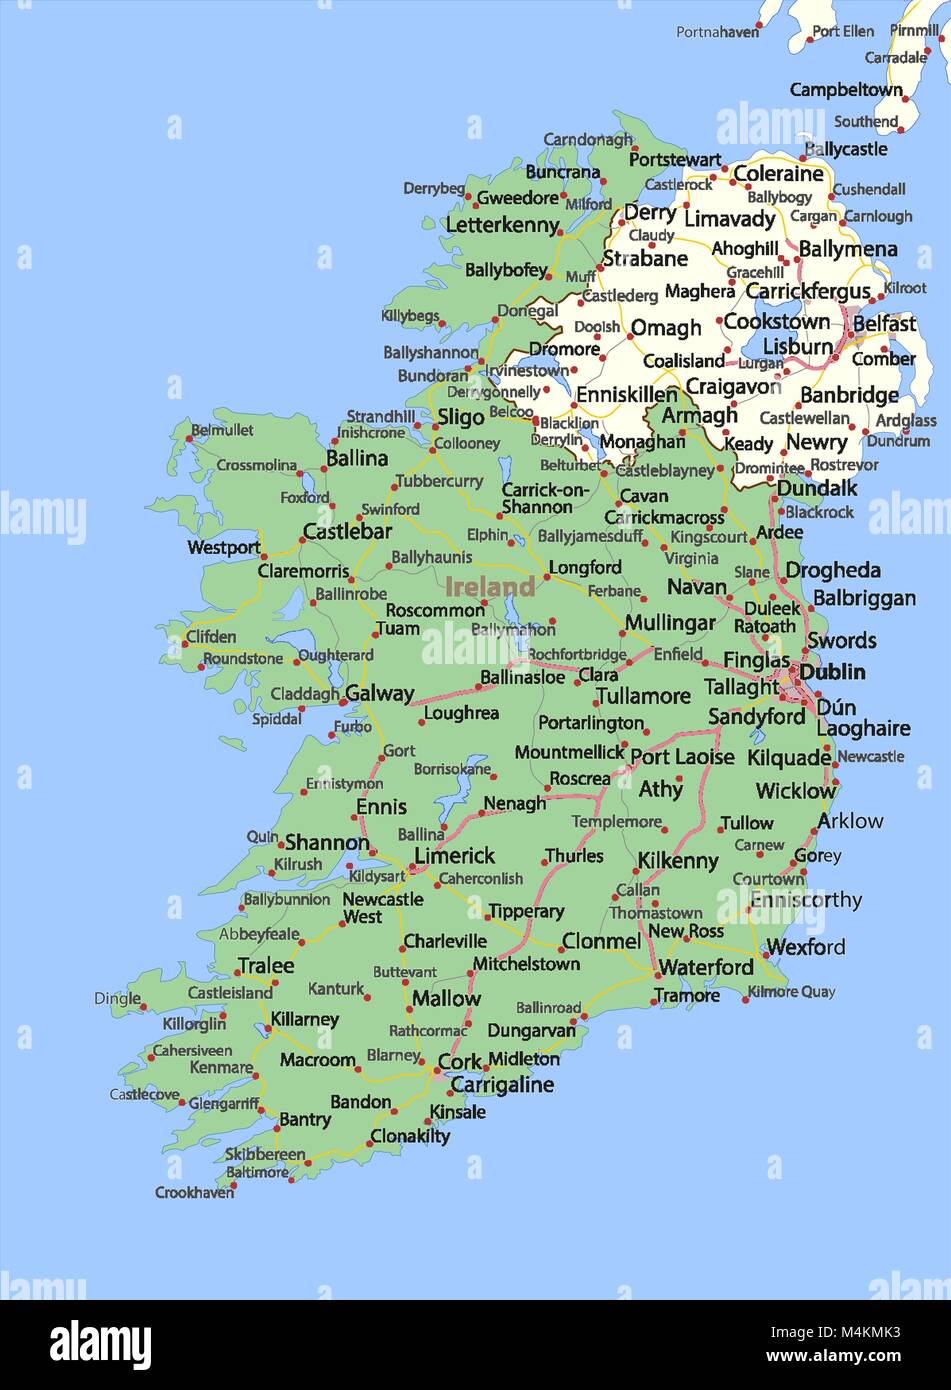 Map of Ireland. Shows country borders, urban areas, place names and roads. Labels in English where possible. Projection: Mercator. Stock Vector